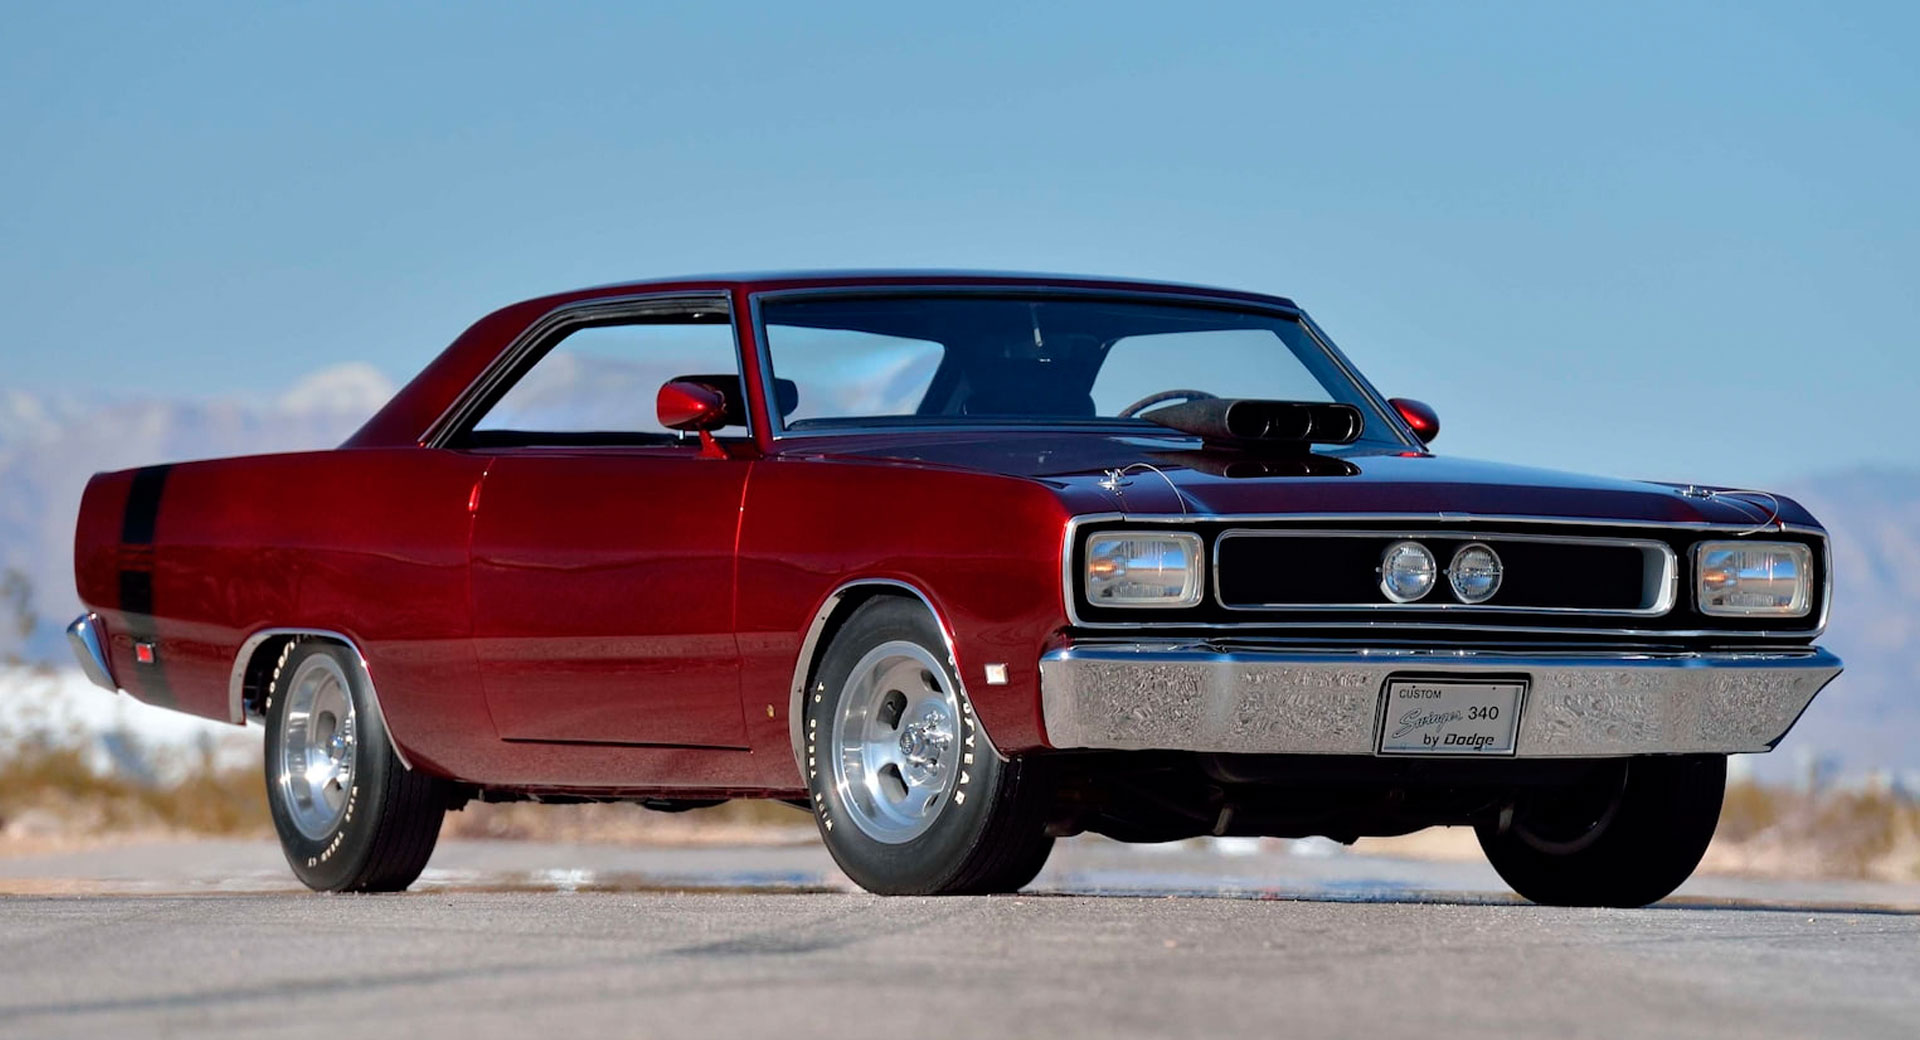 Dodge Dart Swinger 340 Concept Going Up For Auction, Originally Debuted In 1969 Carscoops